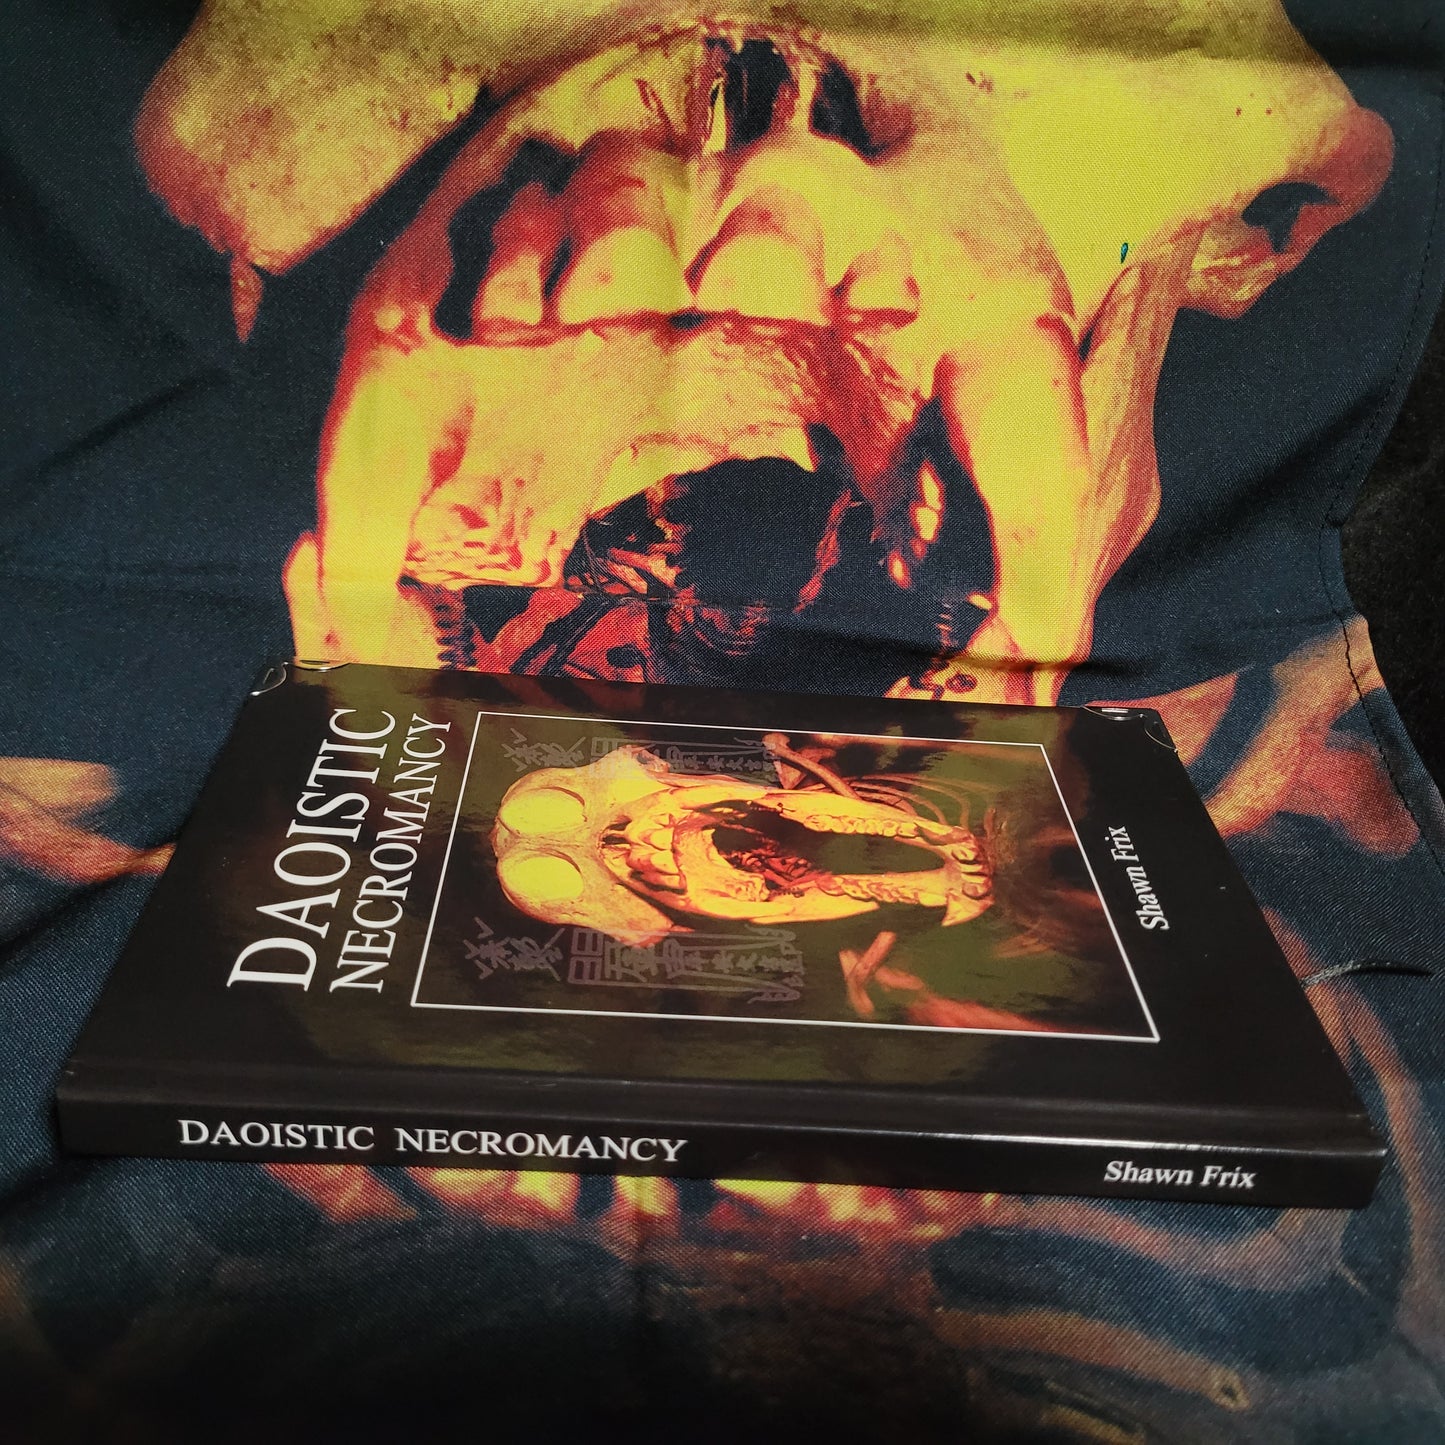 Daoistic Necromancy by Shawn Frix (Sirius Limited Esoterica, 2022) Standard Harcover Edition Limited to 55 Copies Includes Altar Cloth